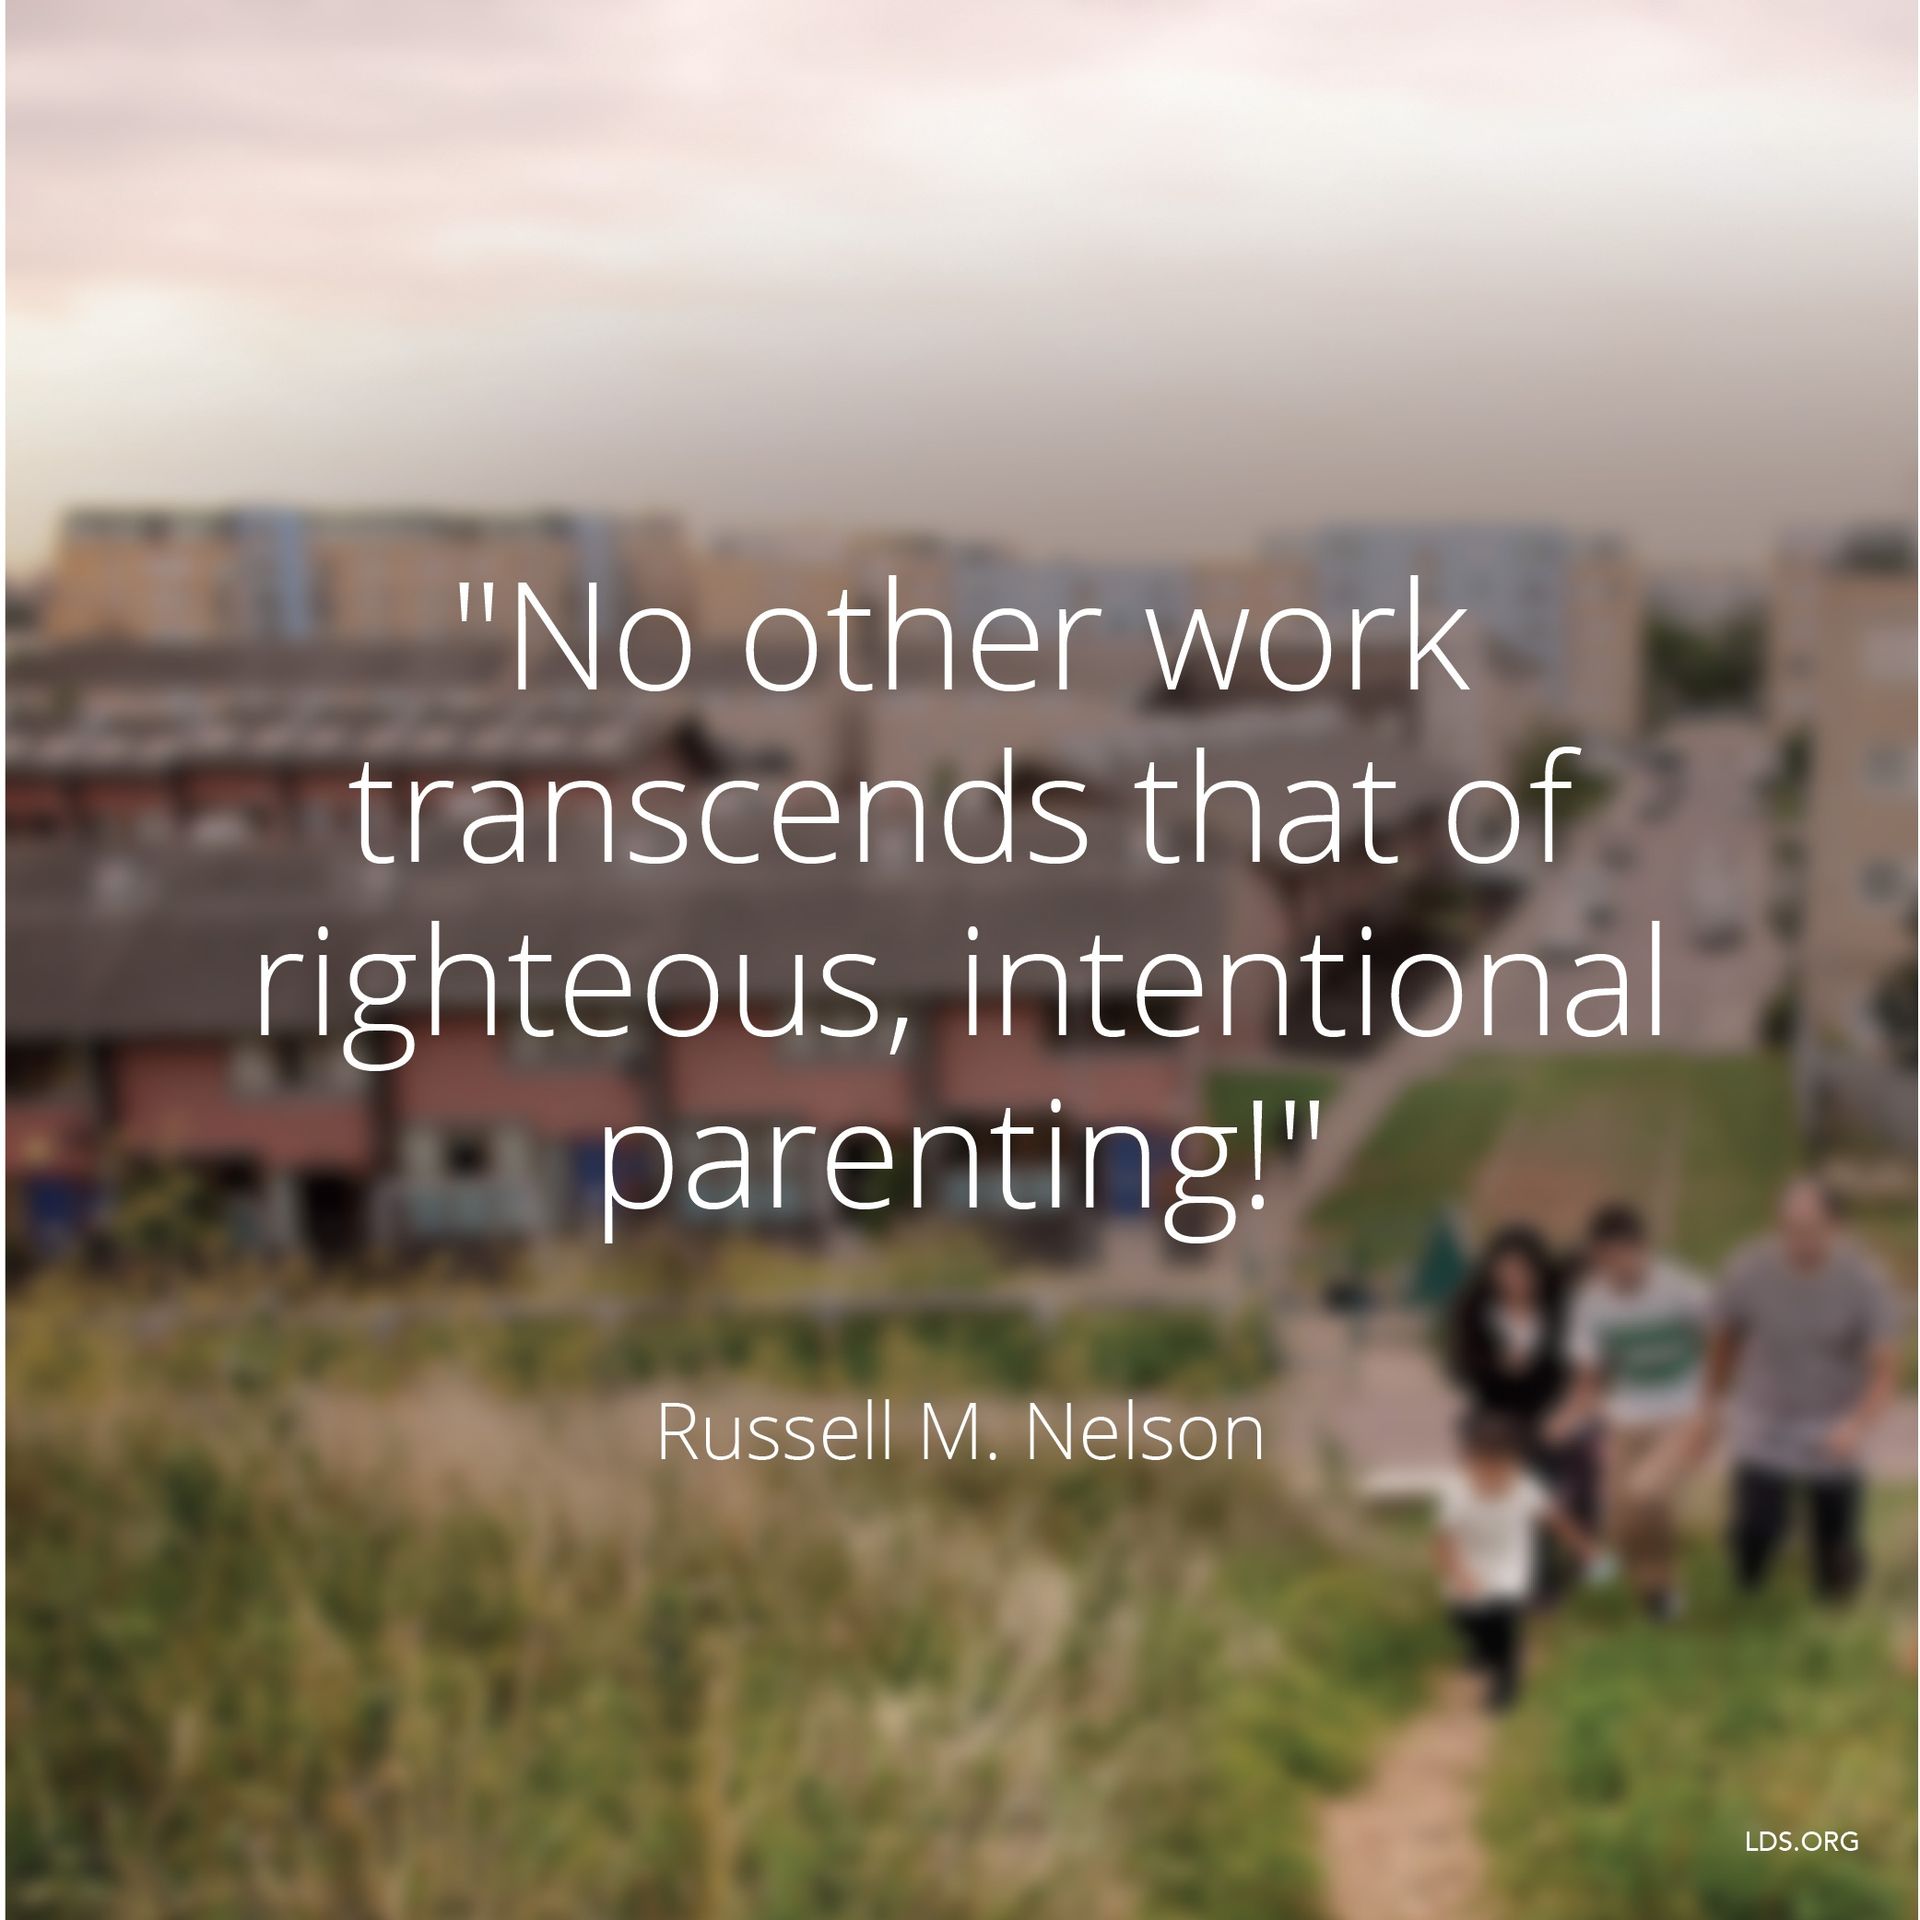 “No other work transcends that of righteous, intentional parenting!”—President Russell M. Nelson, “The Sabbath Is a Delight” © undefined ipCode 1.